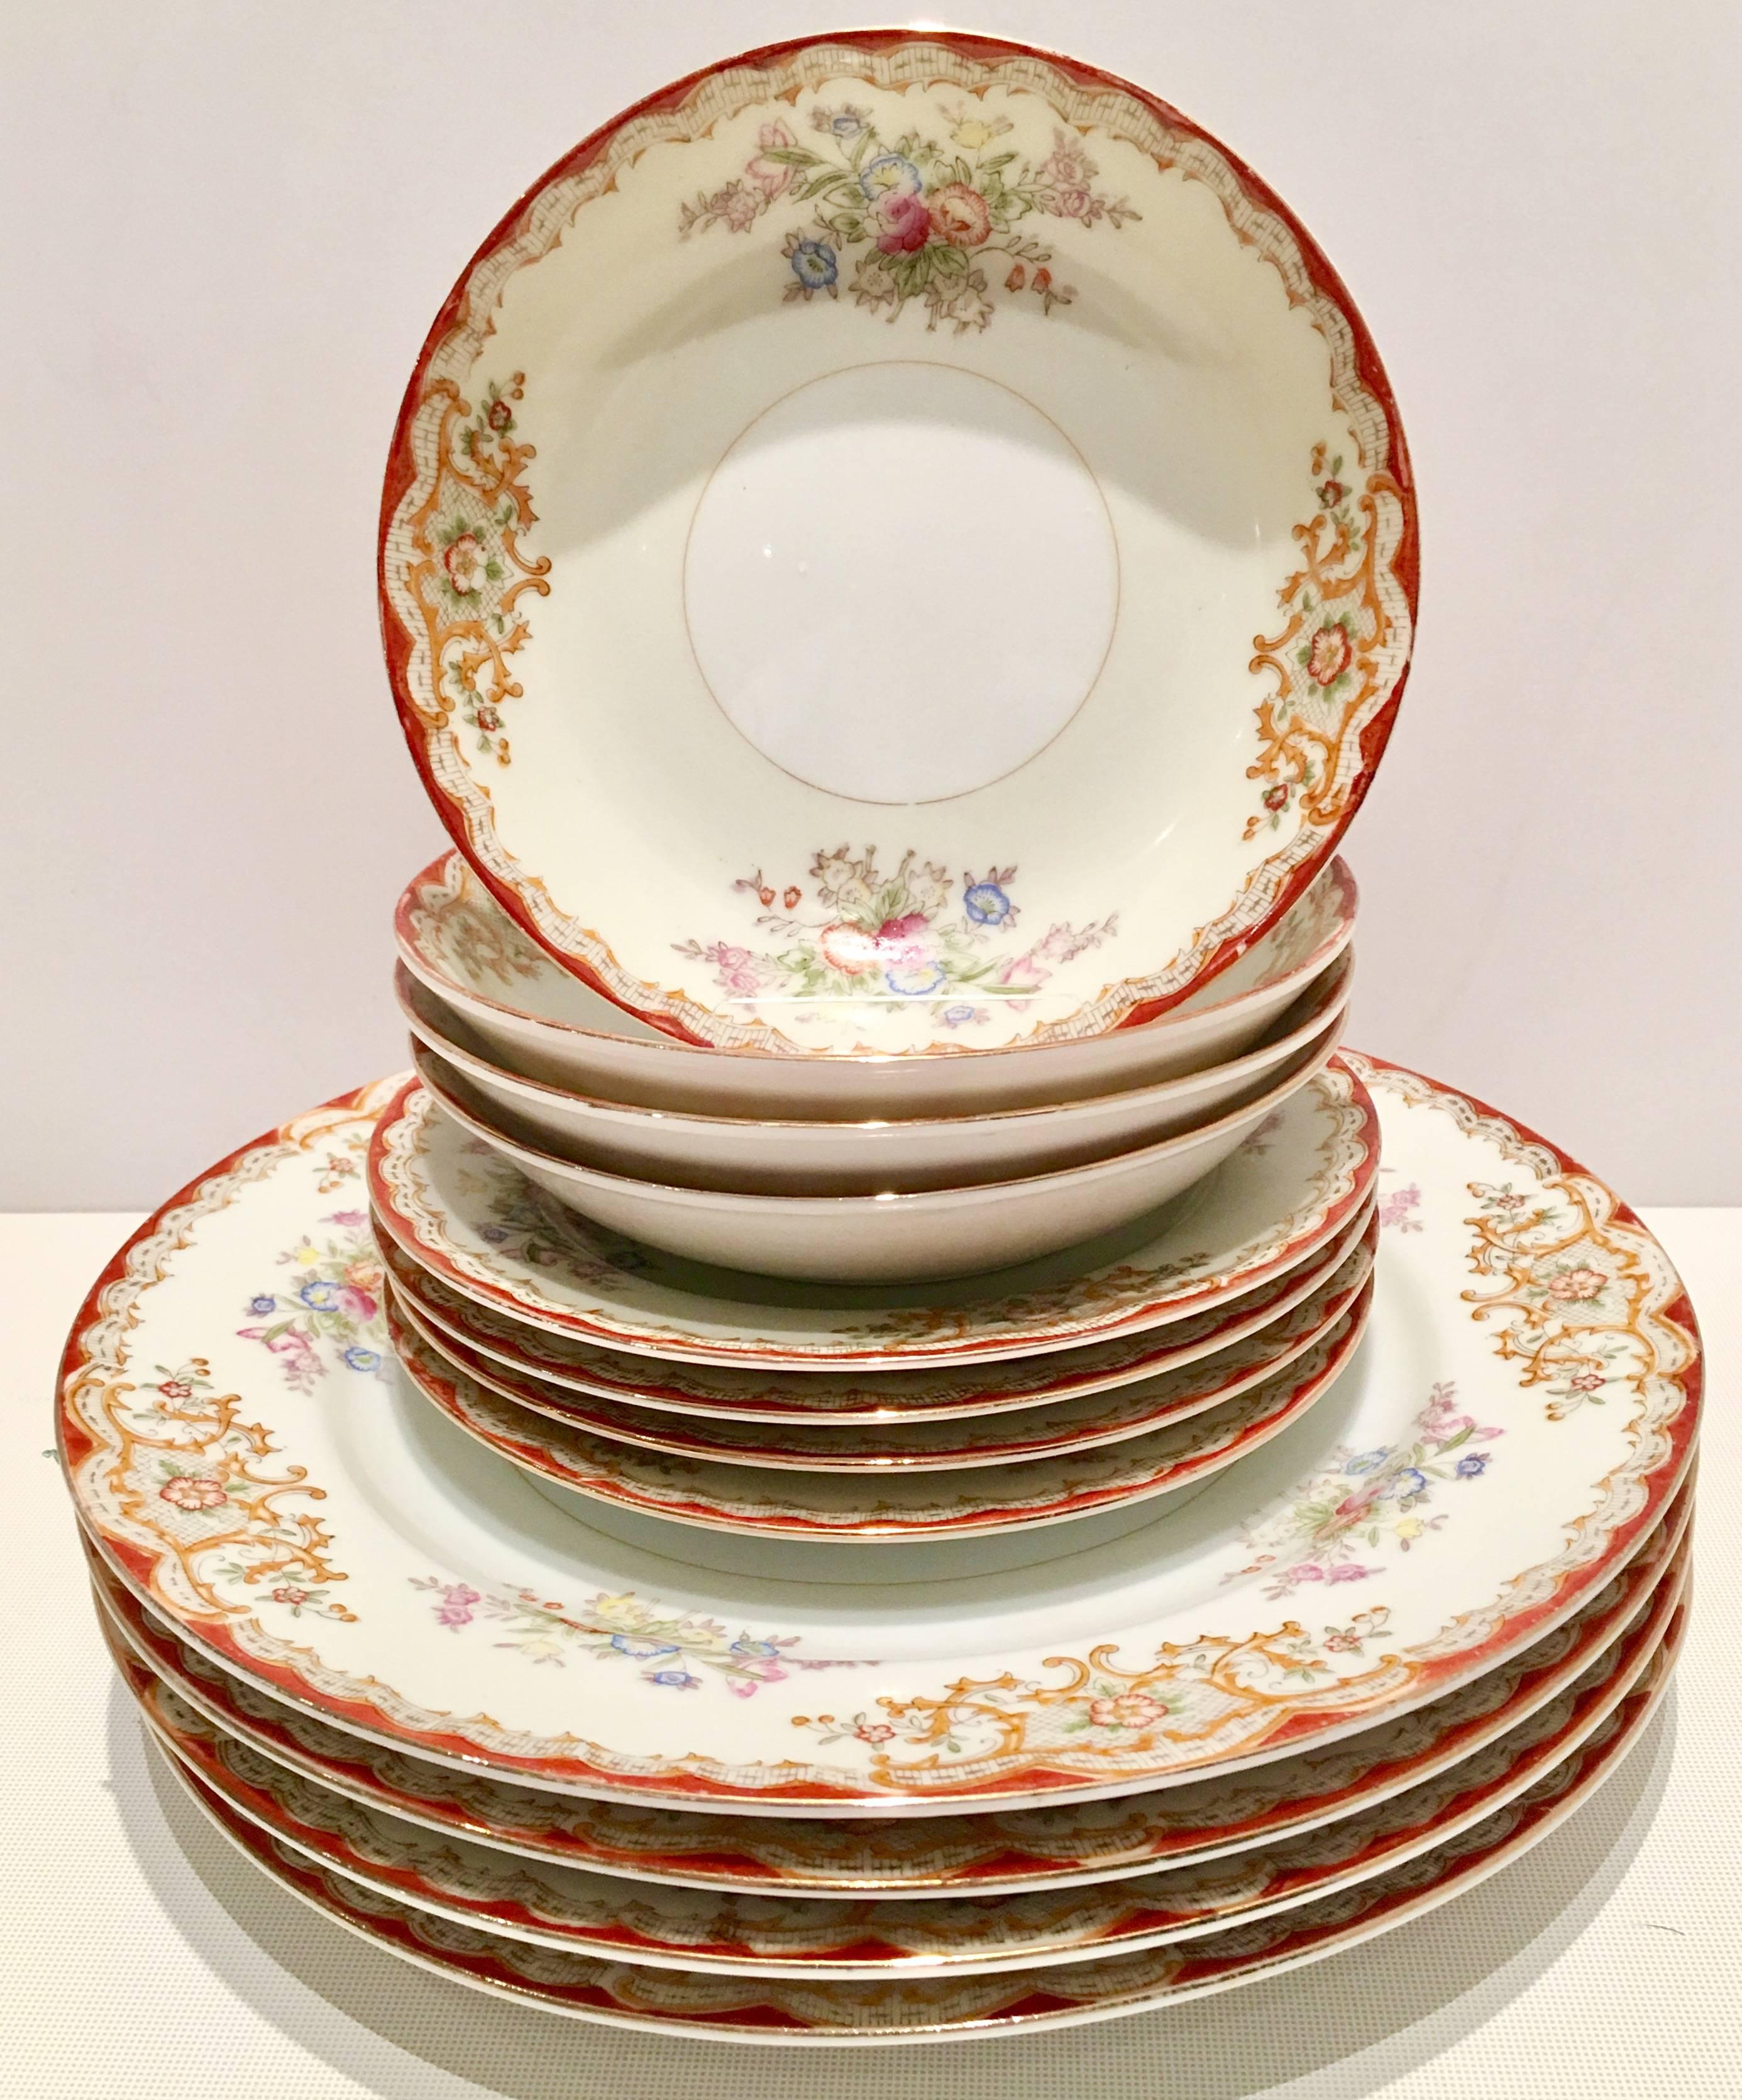 Art Nouveau style Japanese hand-painted porcelain dinnerware set of four “three pieces” settings with 22-karat gold edge detail. Scroll and rose patter of white and cream ground with a red and 22-karat gold edge and bright orange dominating color